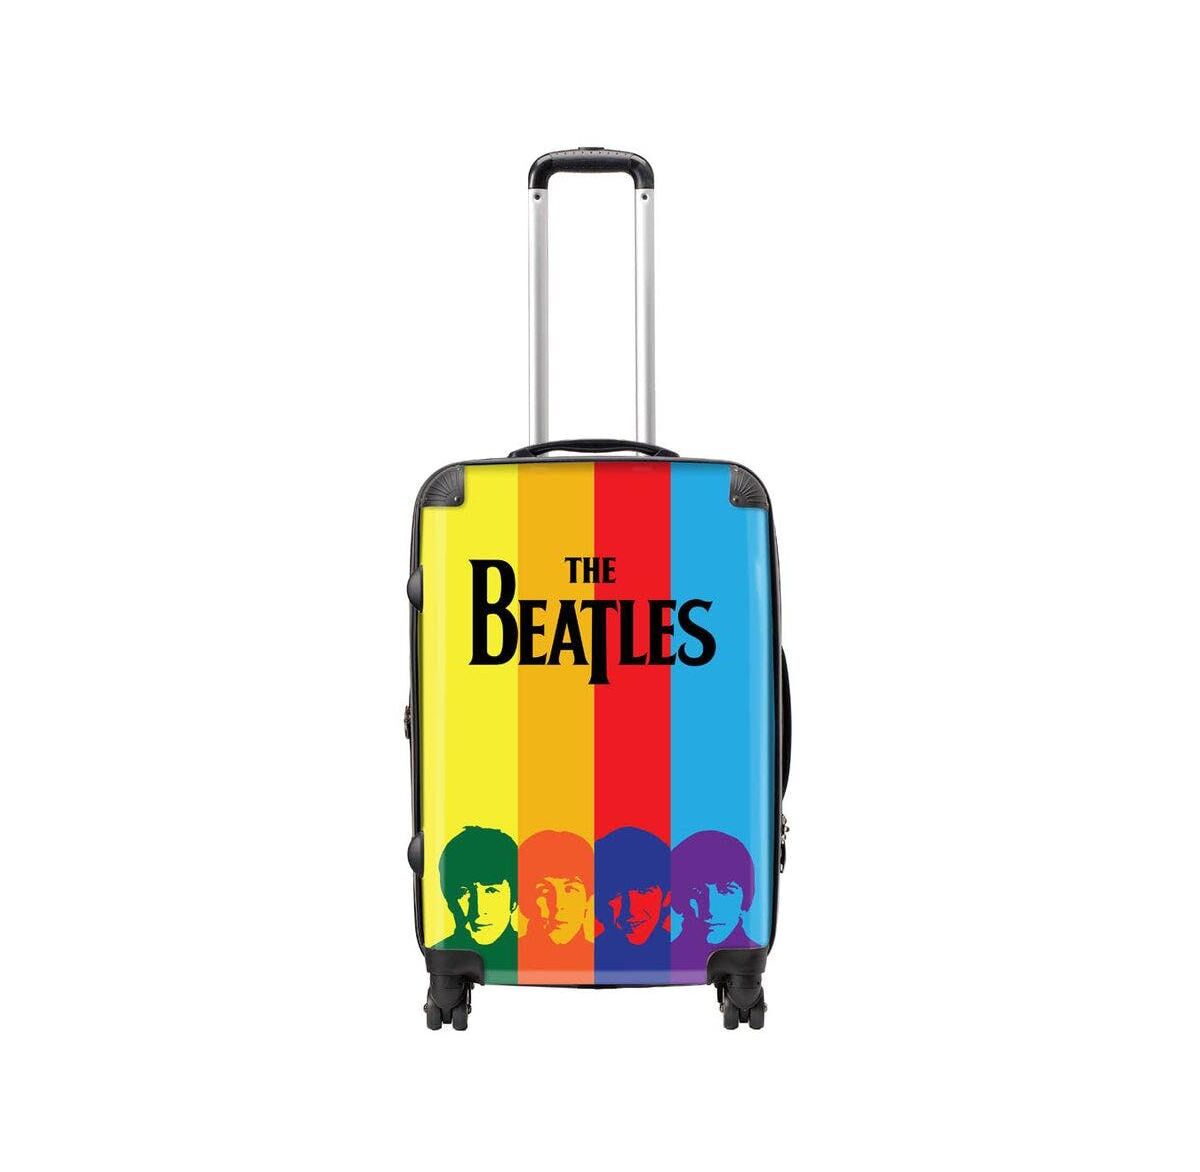 Rocksax The Beatles Tour Series Luggage - Hard Days Night - Medium - Check In - Multi-colored